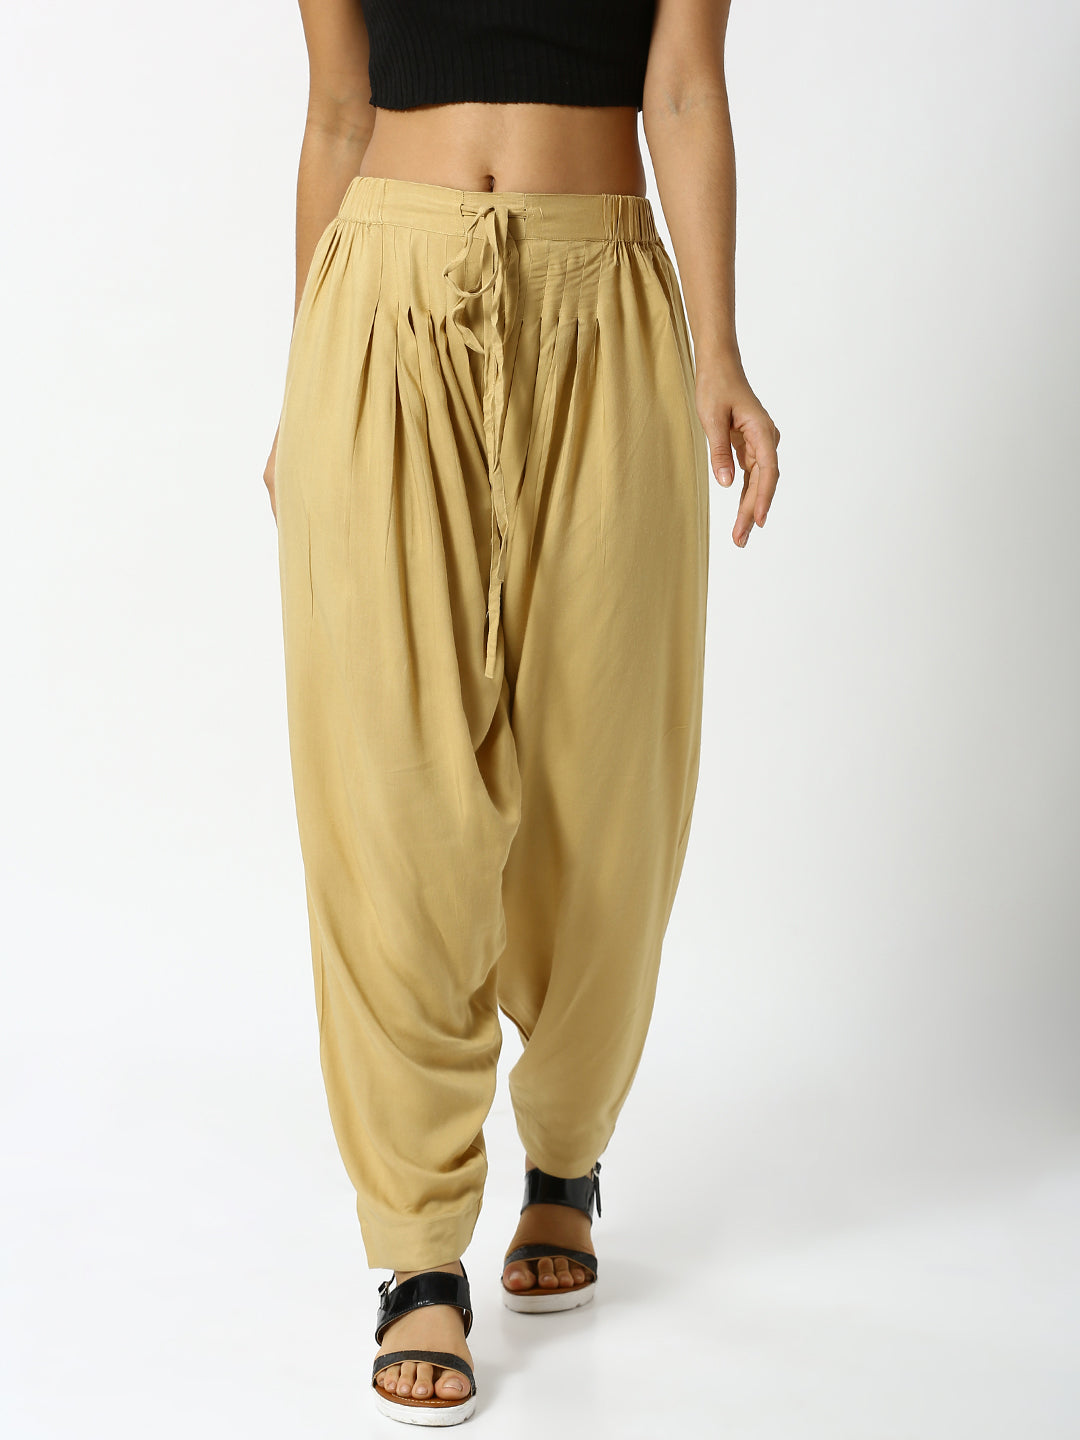 Men's Indian Style Pants: Black Traditional Indian Baggy Pants